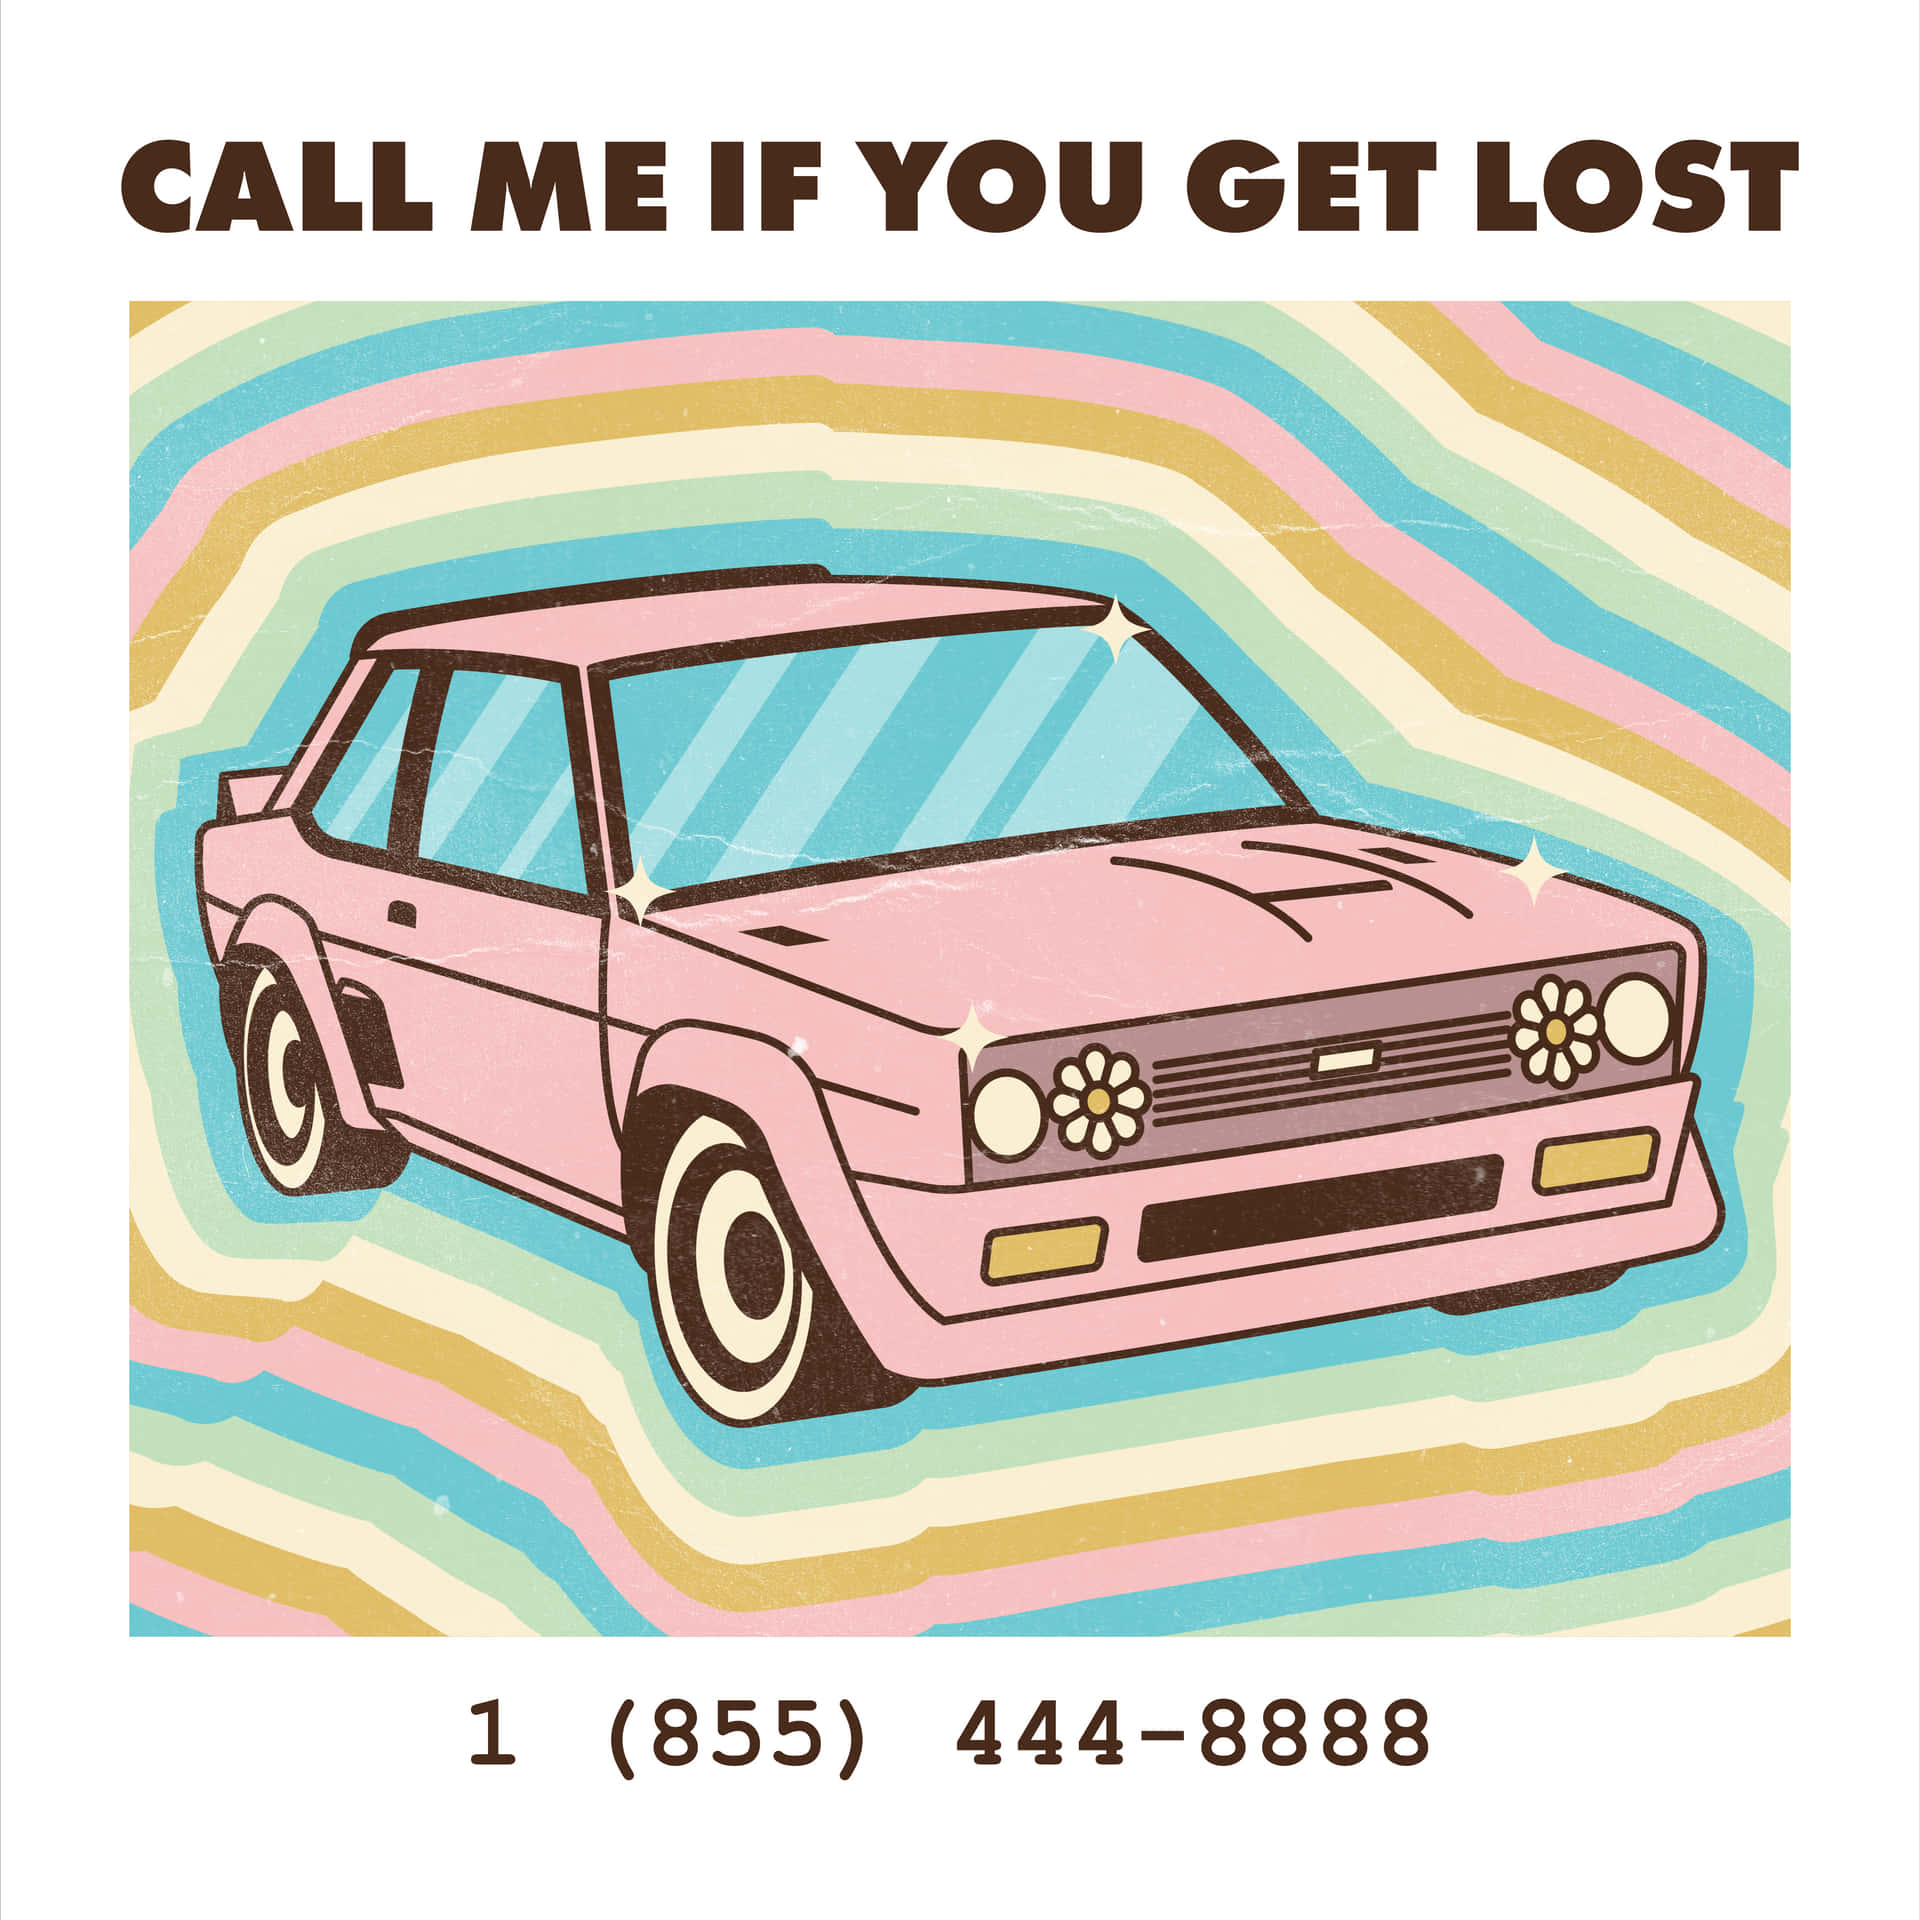 Never get lost again, call me and I'll come save you. Wallpaper